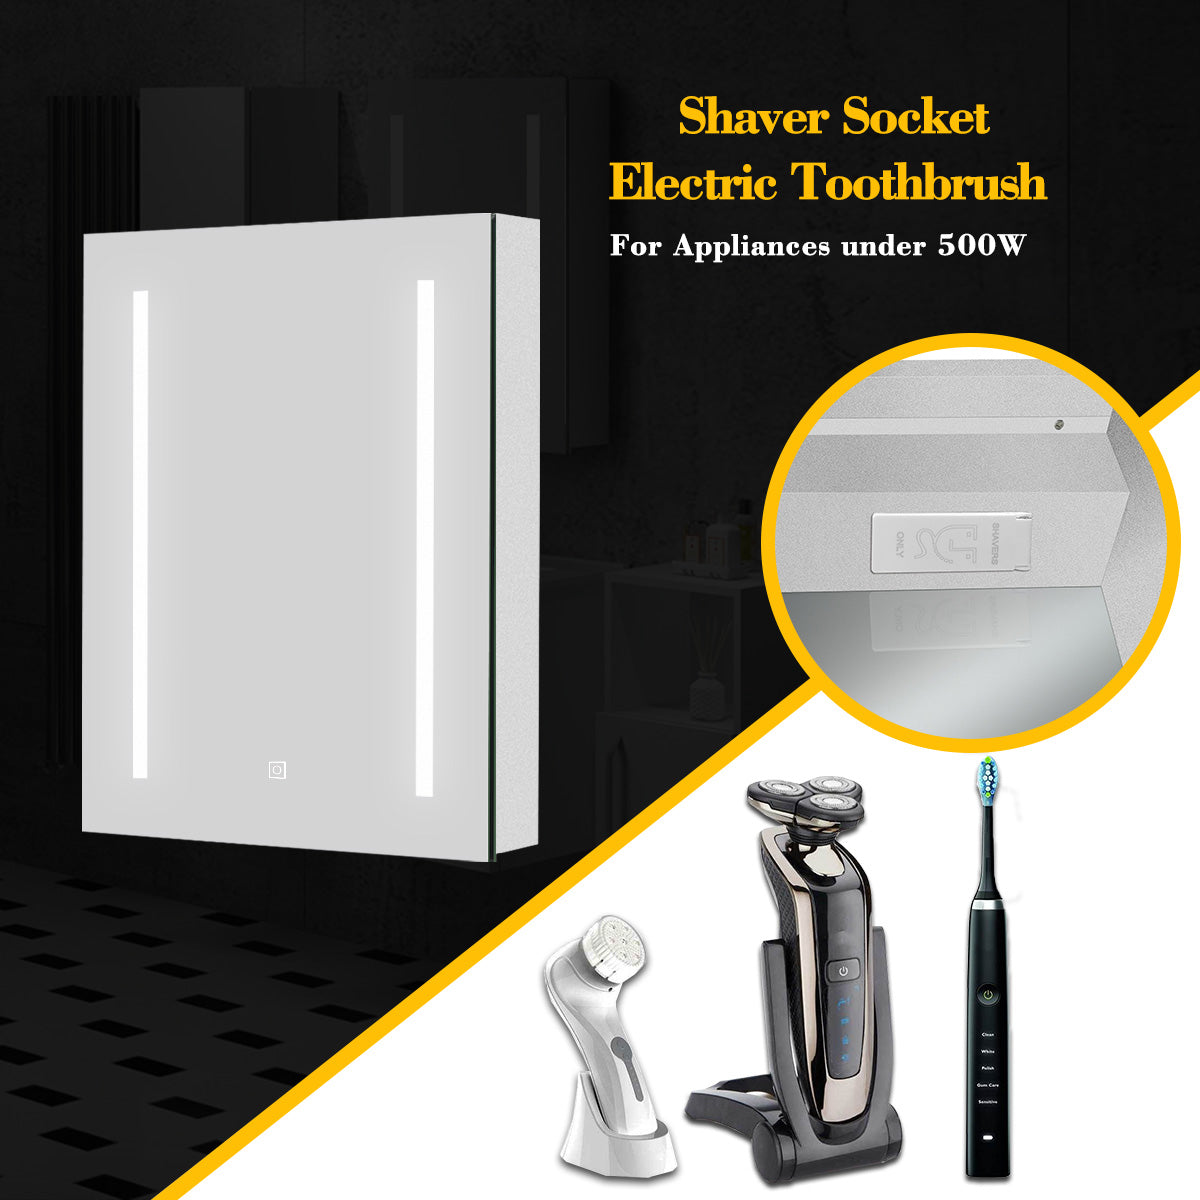 fog-free mirror cabinet with shaver socket